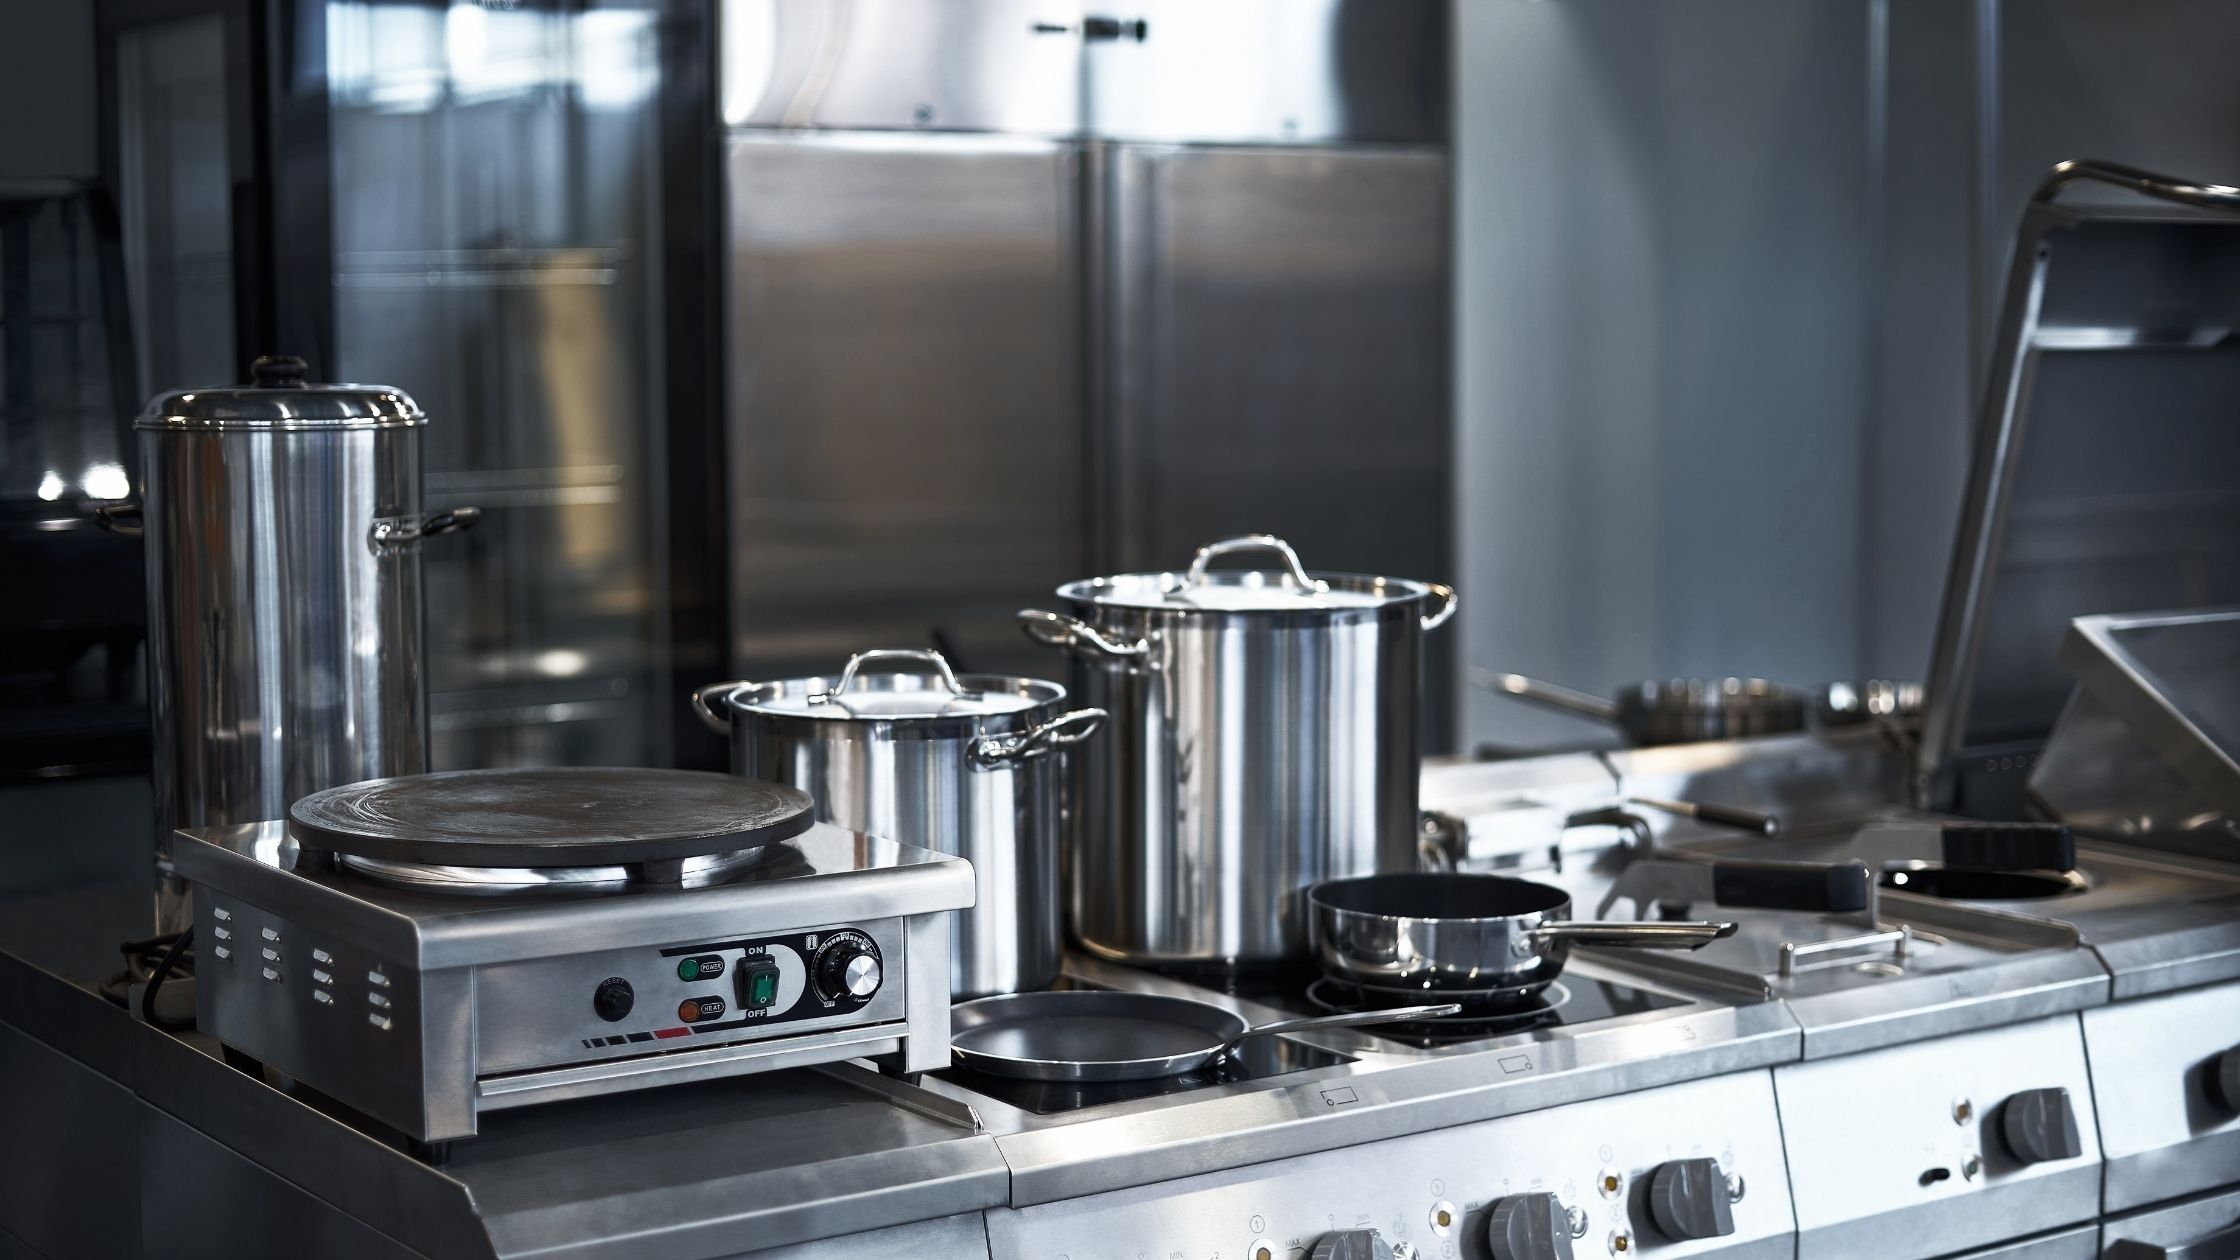 What equipment does a restaurant kitchen need